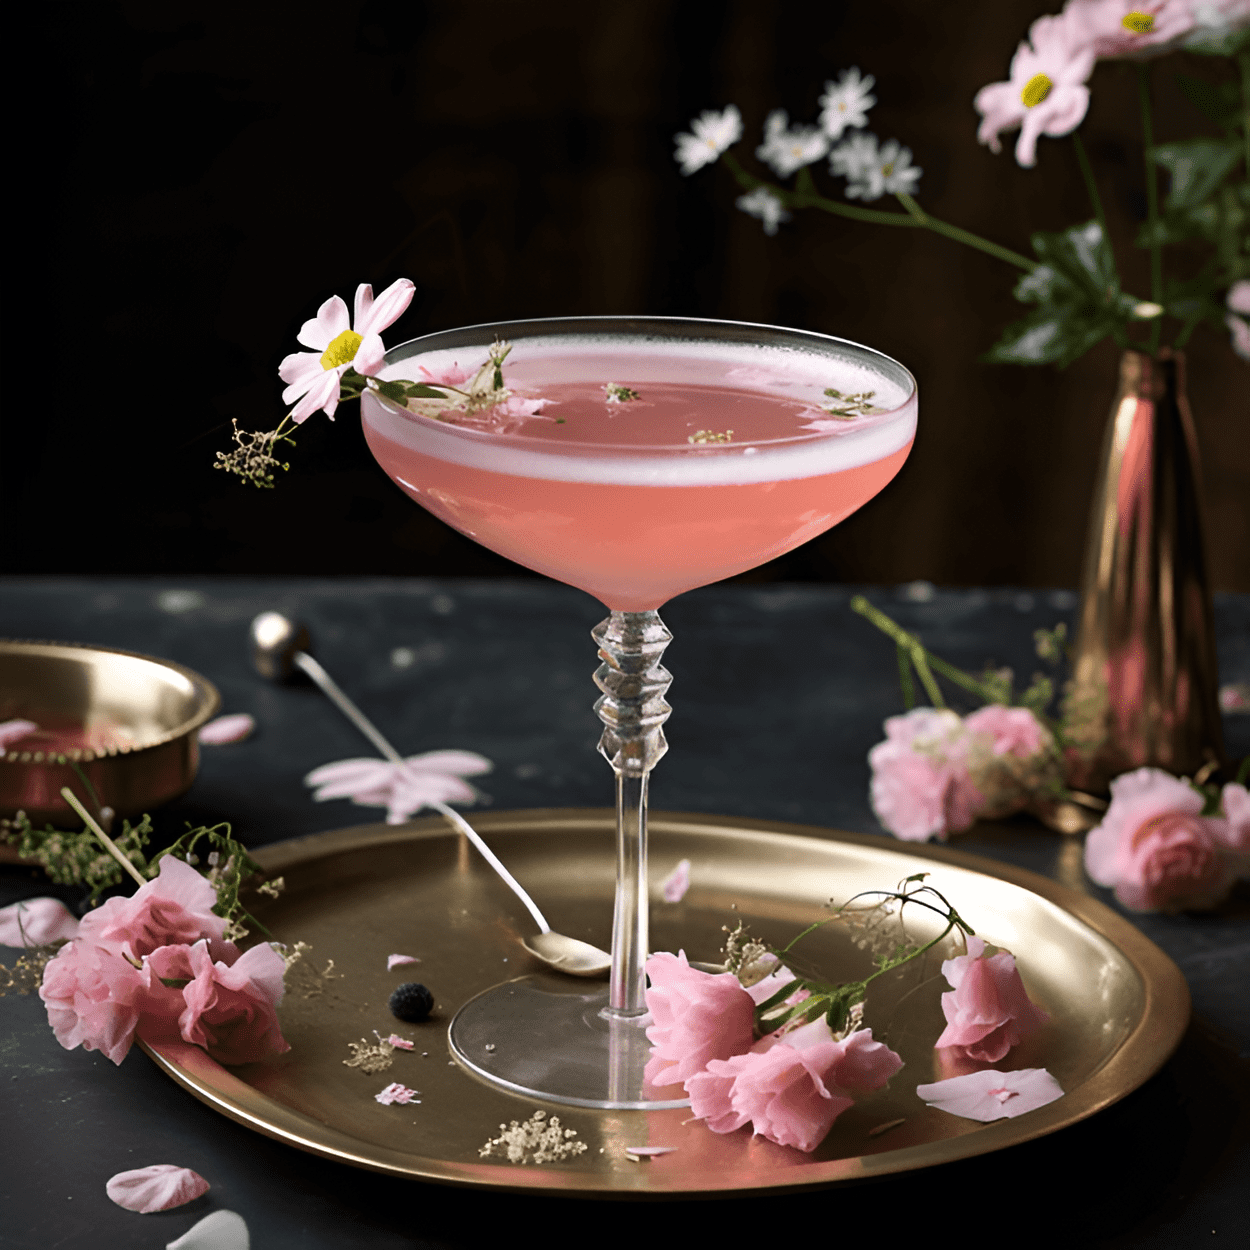 Floral Elixir Cocktail Recipe - The Floral Elixir is a light, refreshing cocktail with a hint of sweetness. It has a delicate floral taste with notes of elderflower, rose, and lavender. The addition of lemon juice adds a tangy twist, balancing out the sweetness and adding a zesty finish.